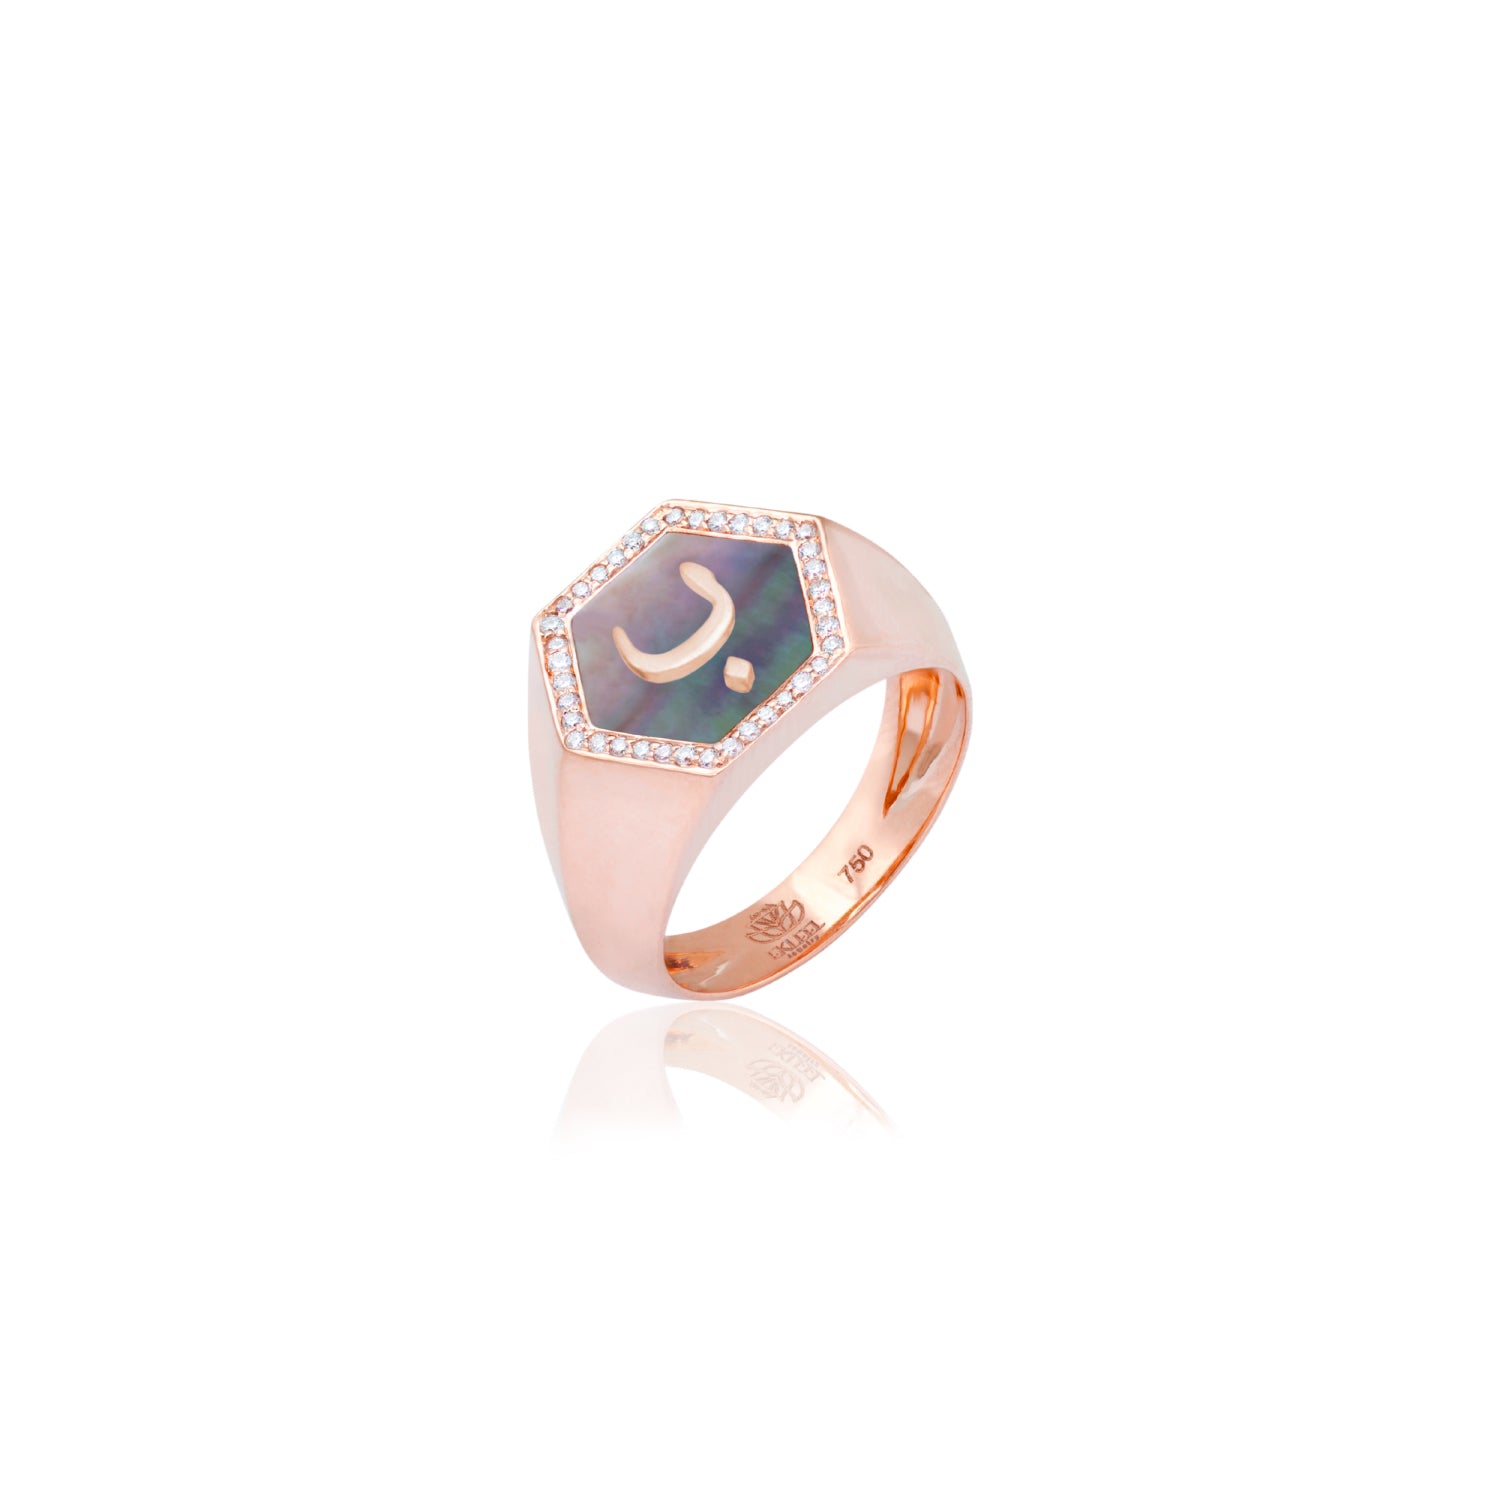 Qamoos 2.0 Letter ب Black Mother of Pearl and Diamond Signet Ring in Rose Gold